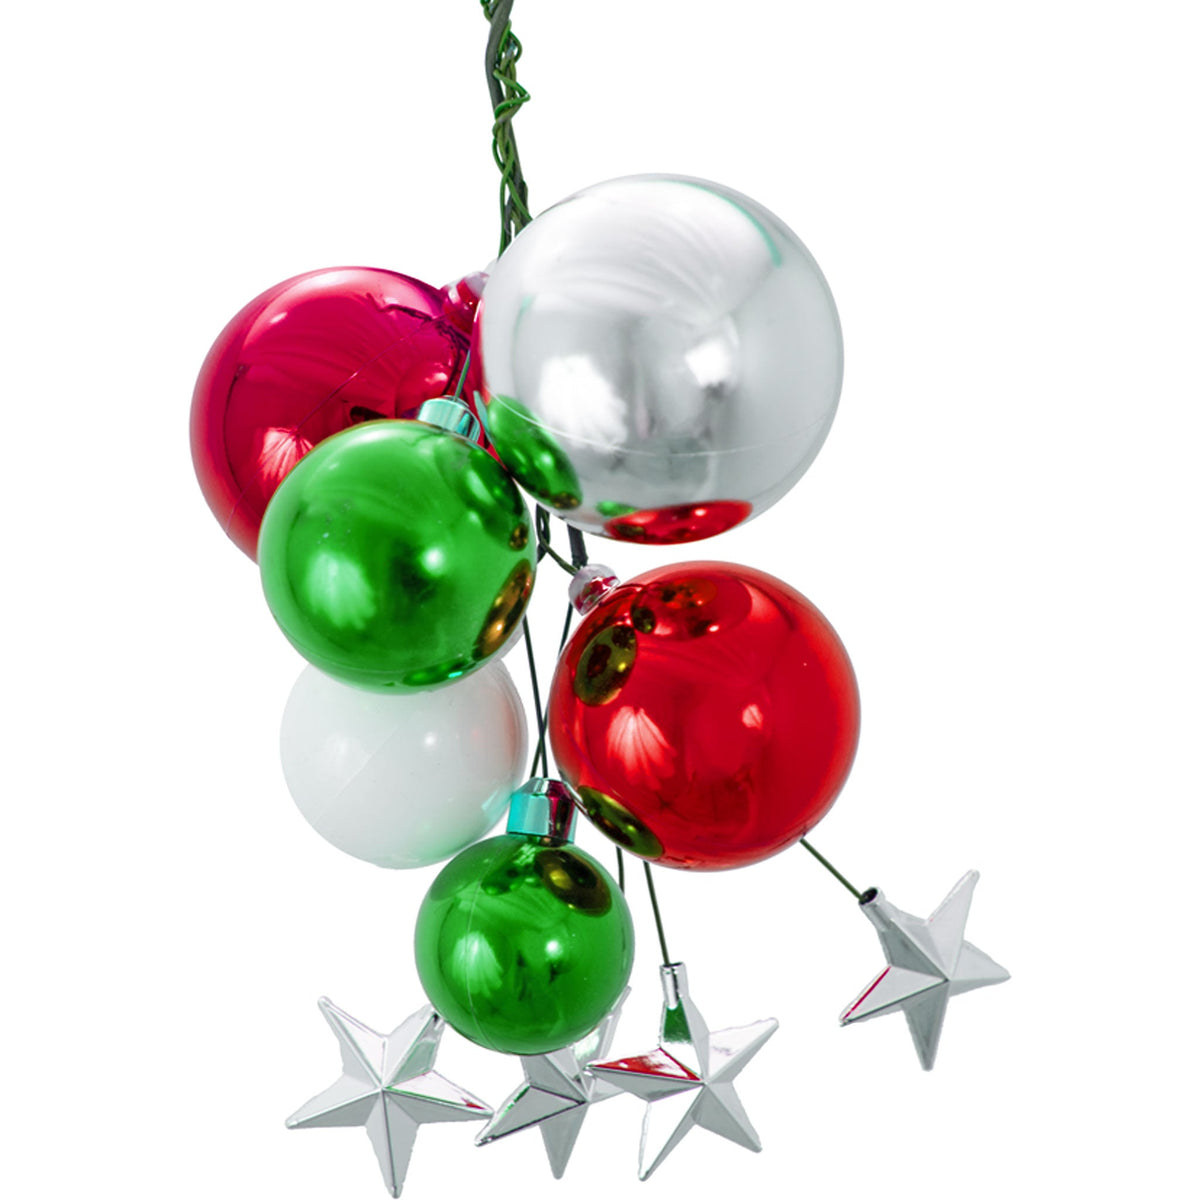 Colors include:  2 - Shiny Red Ball Ornaments (80MM & 70MM) 1 - Shiny Silver Ball Ornament (80MM) 2 - Shiny Green Ball Ornaments (70MM & 60MM) 4 - Shiny Silver Stars